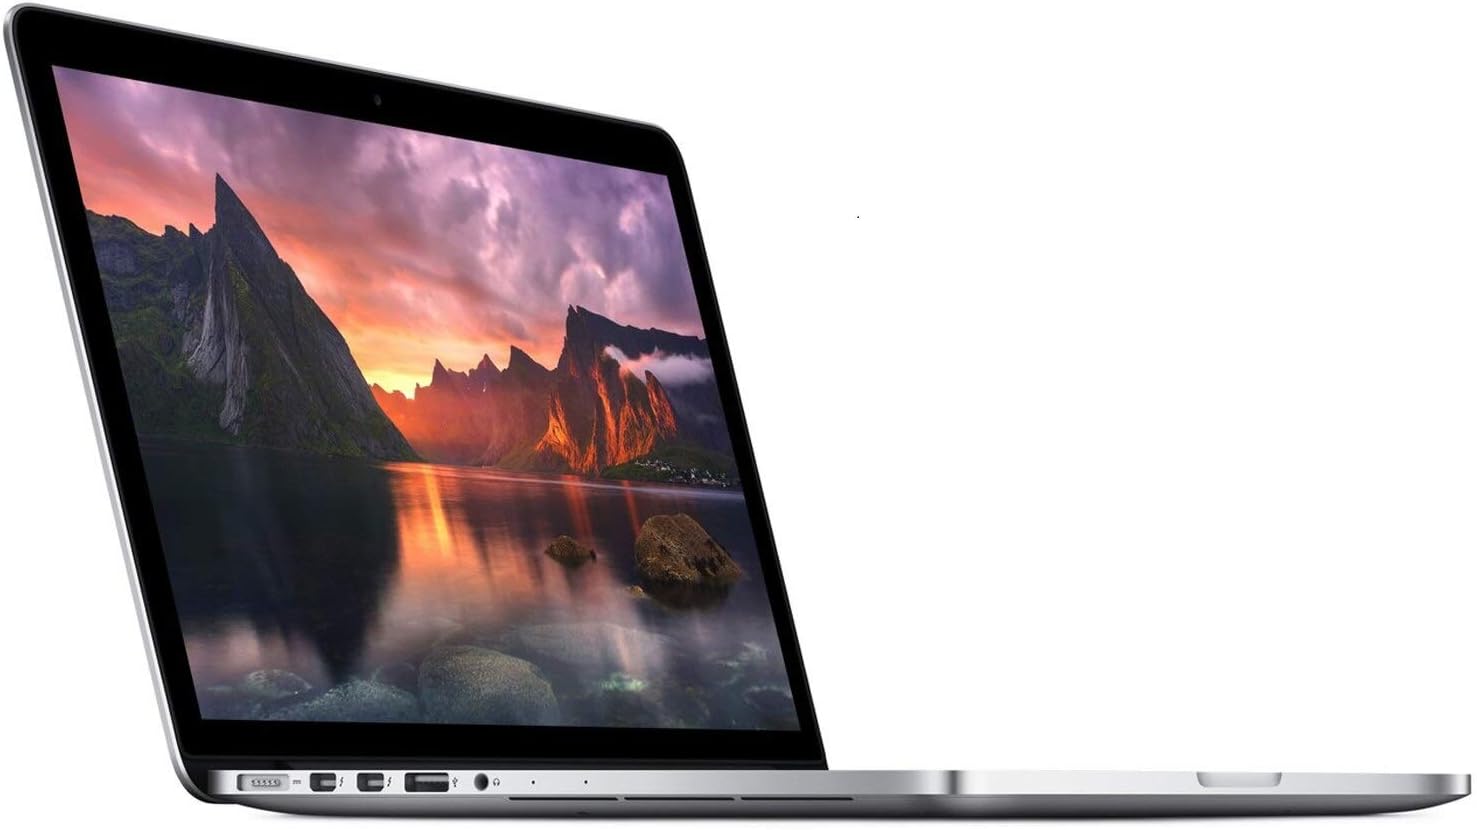 You are currently viewing Comparing MacBook Pro MF839ll/a (2015) – 16GB vs 8GB RAM